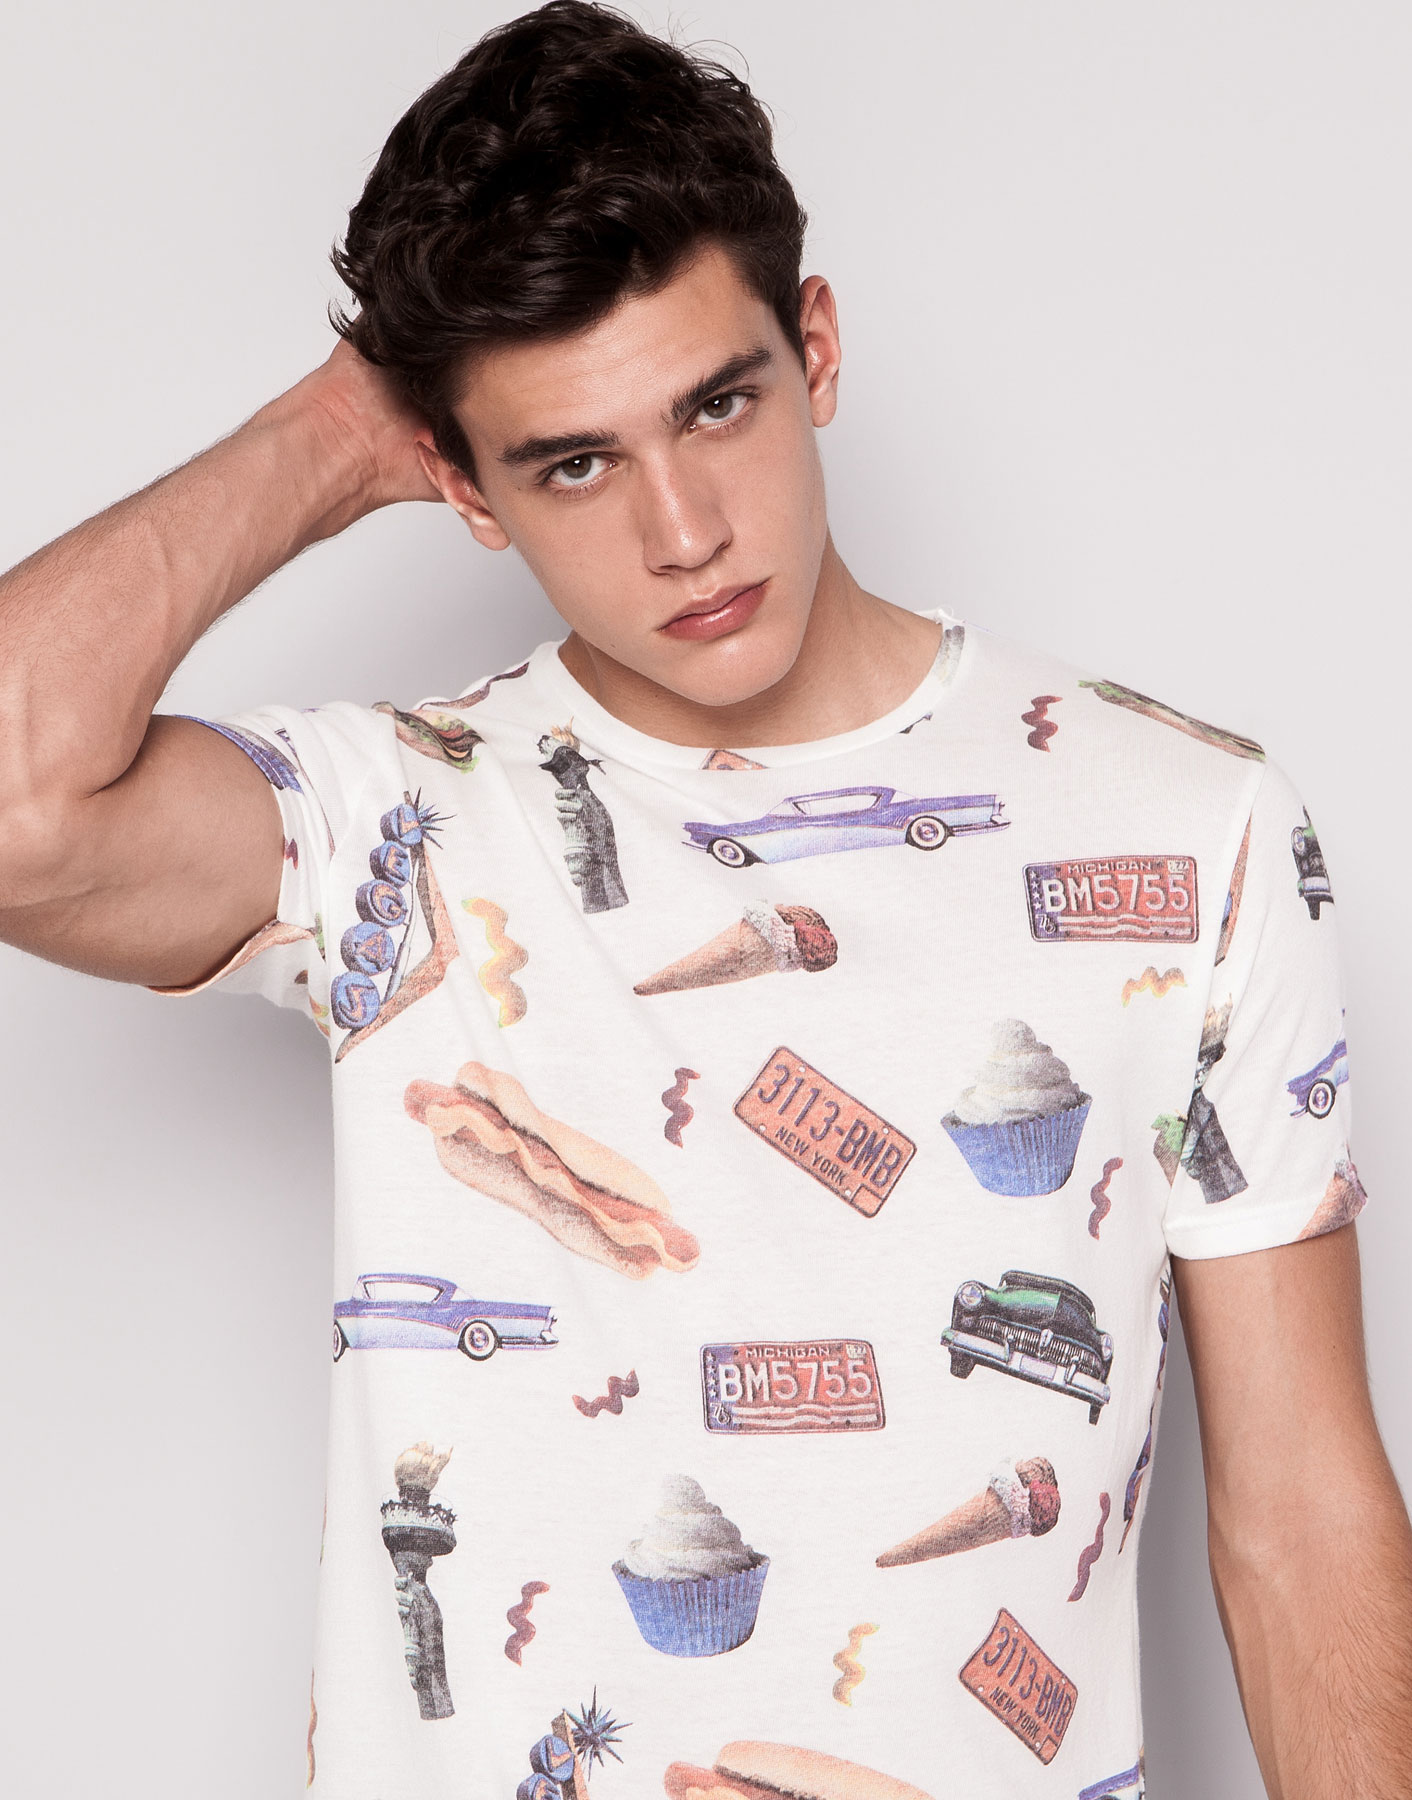 Xavier Serrano Models Trendy Young Clothes for Pull & Bear August 2014 Arrivals